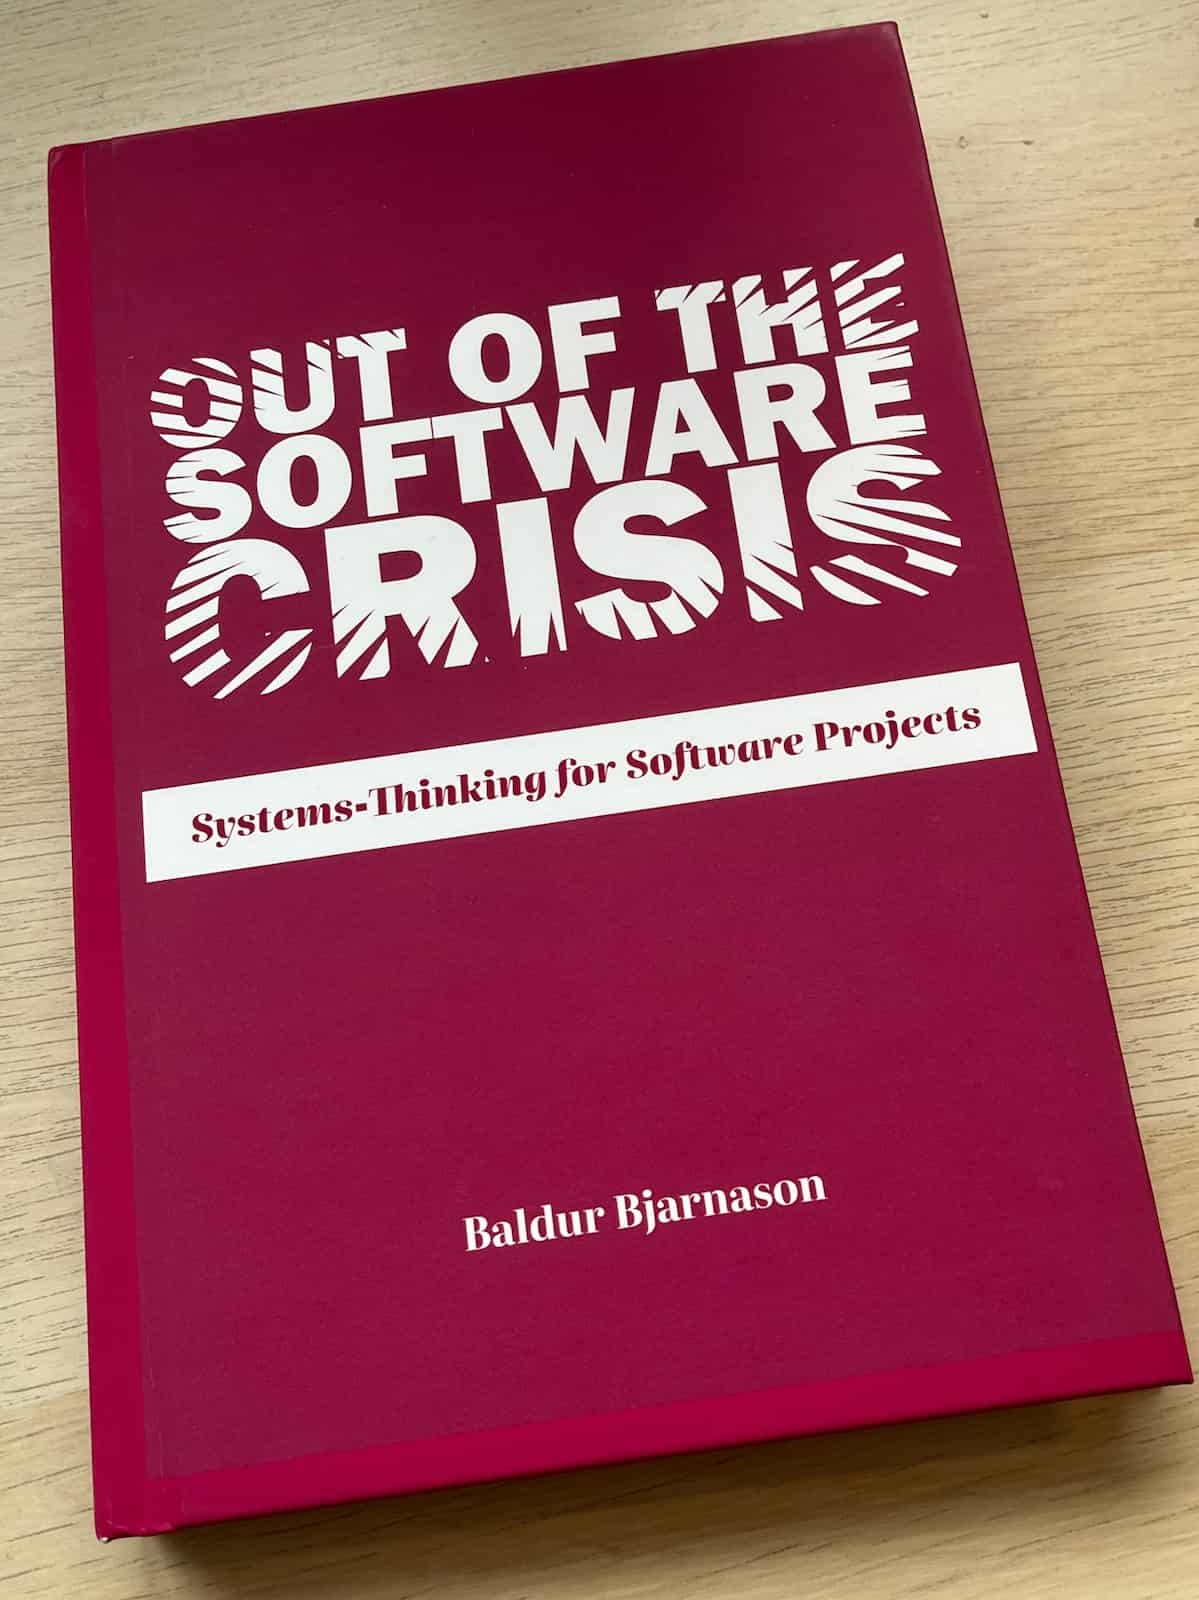 Photo of a proof of the hardcover edition of Out of the Software Crisis